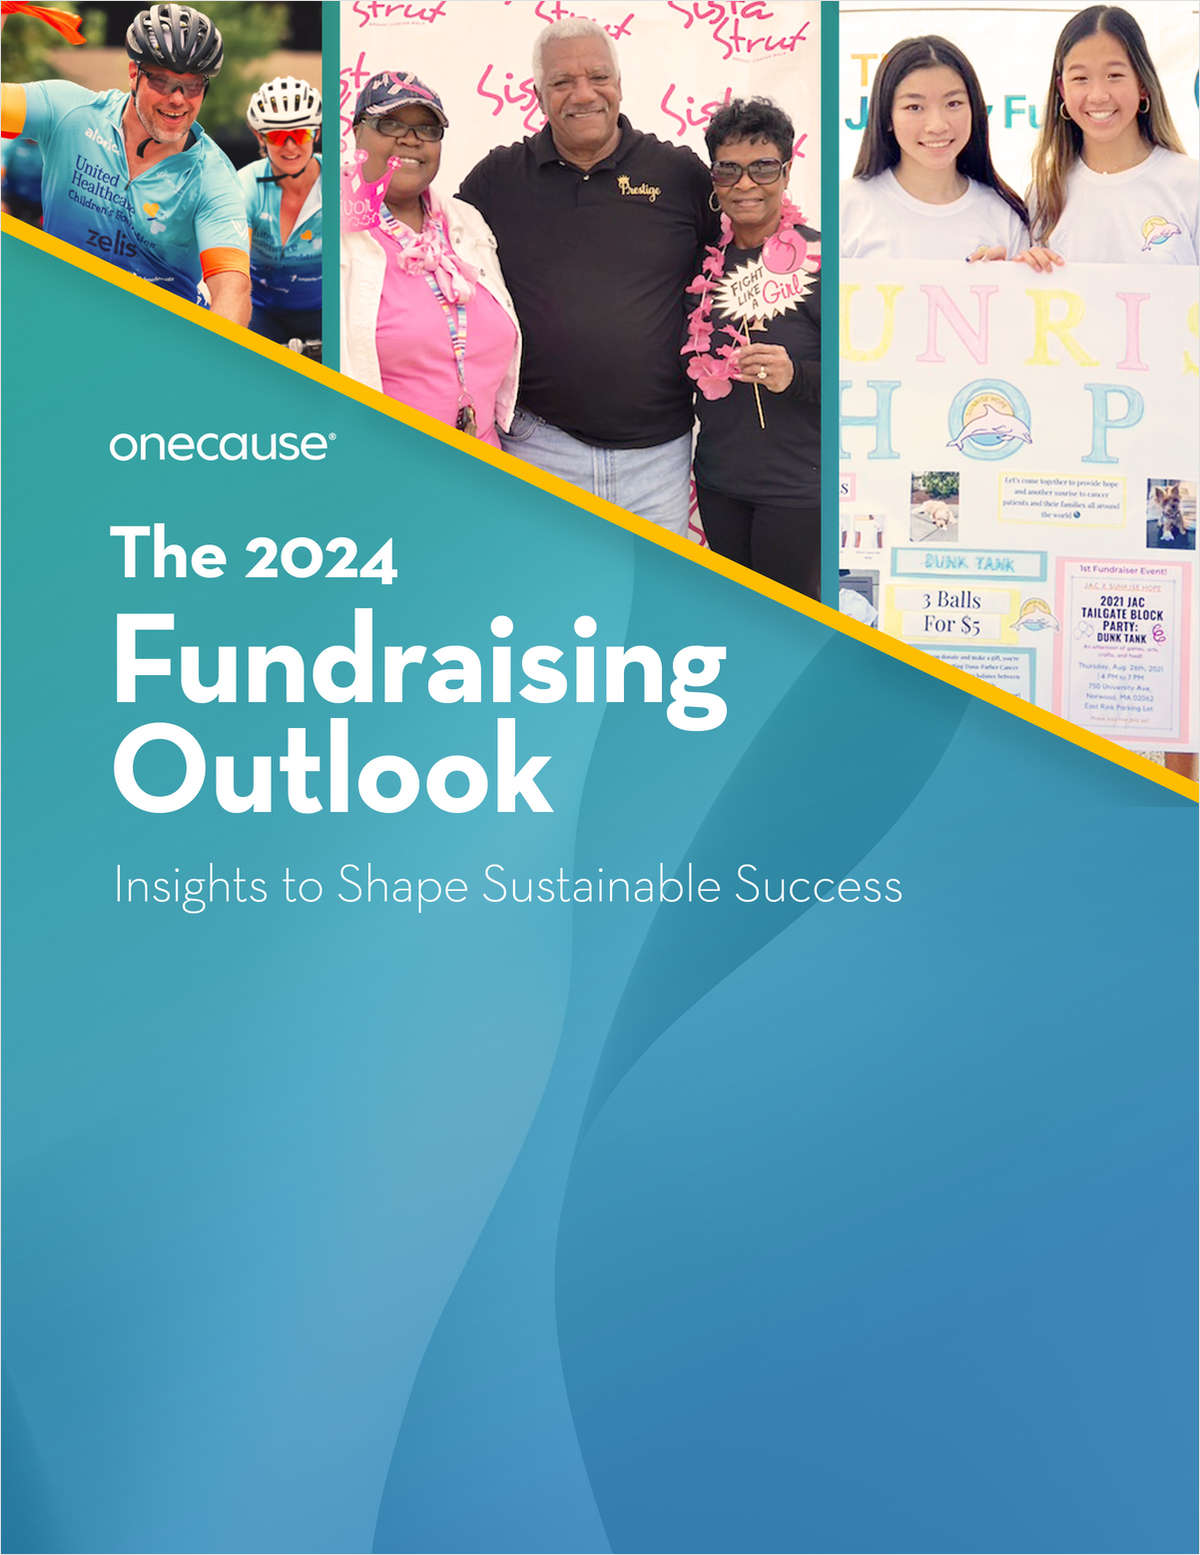 The 2024 Fundraising Outlook